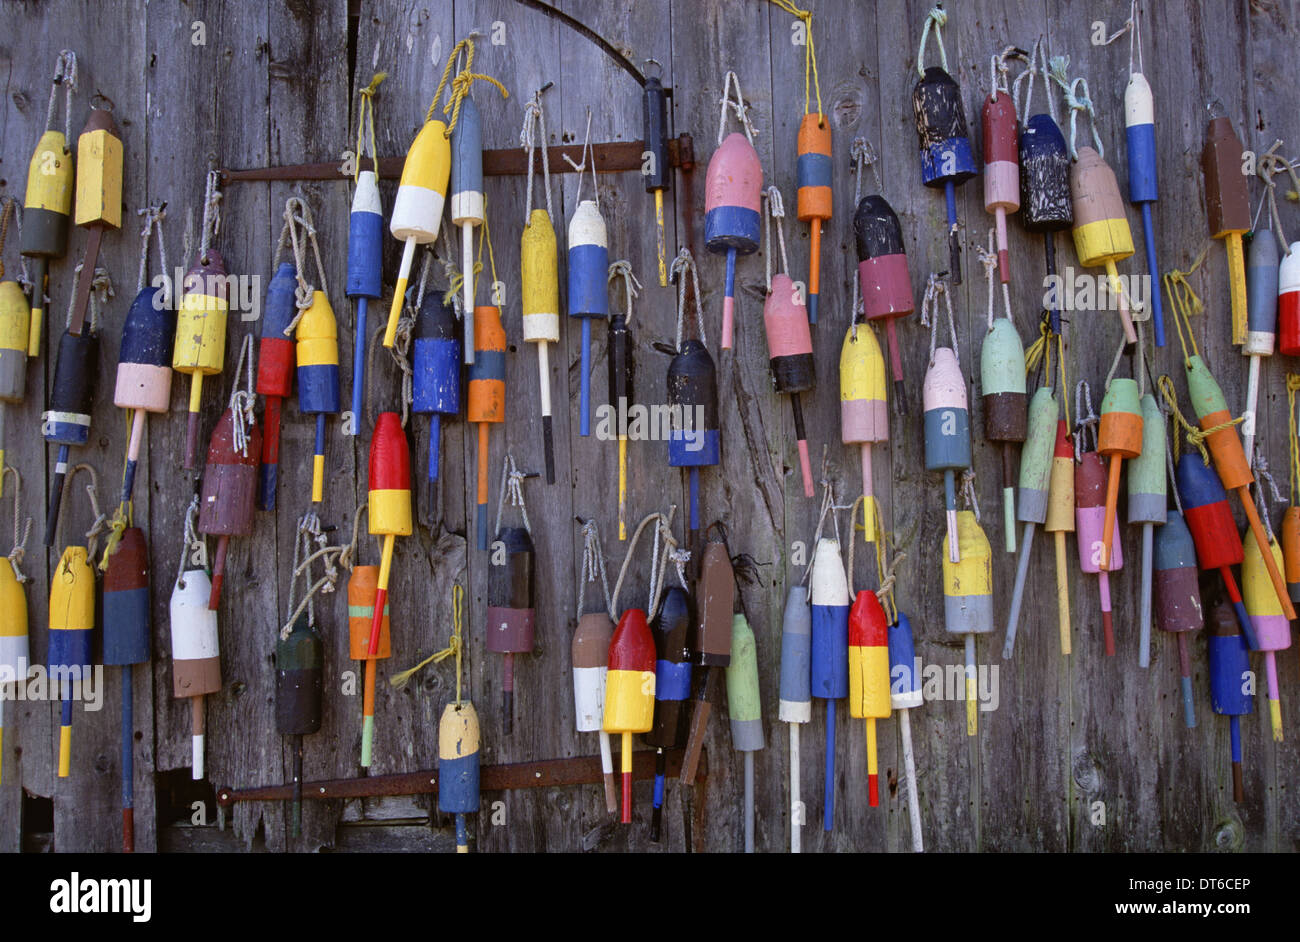 Fishing marker marine buoys or floats hanging on a fishing shed wall on the waterfront. Stock Photo